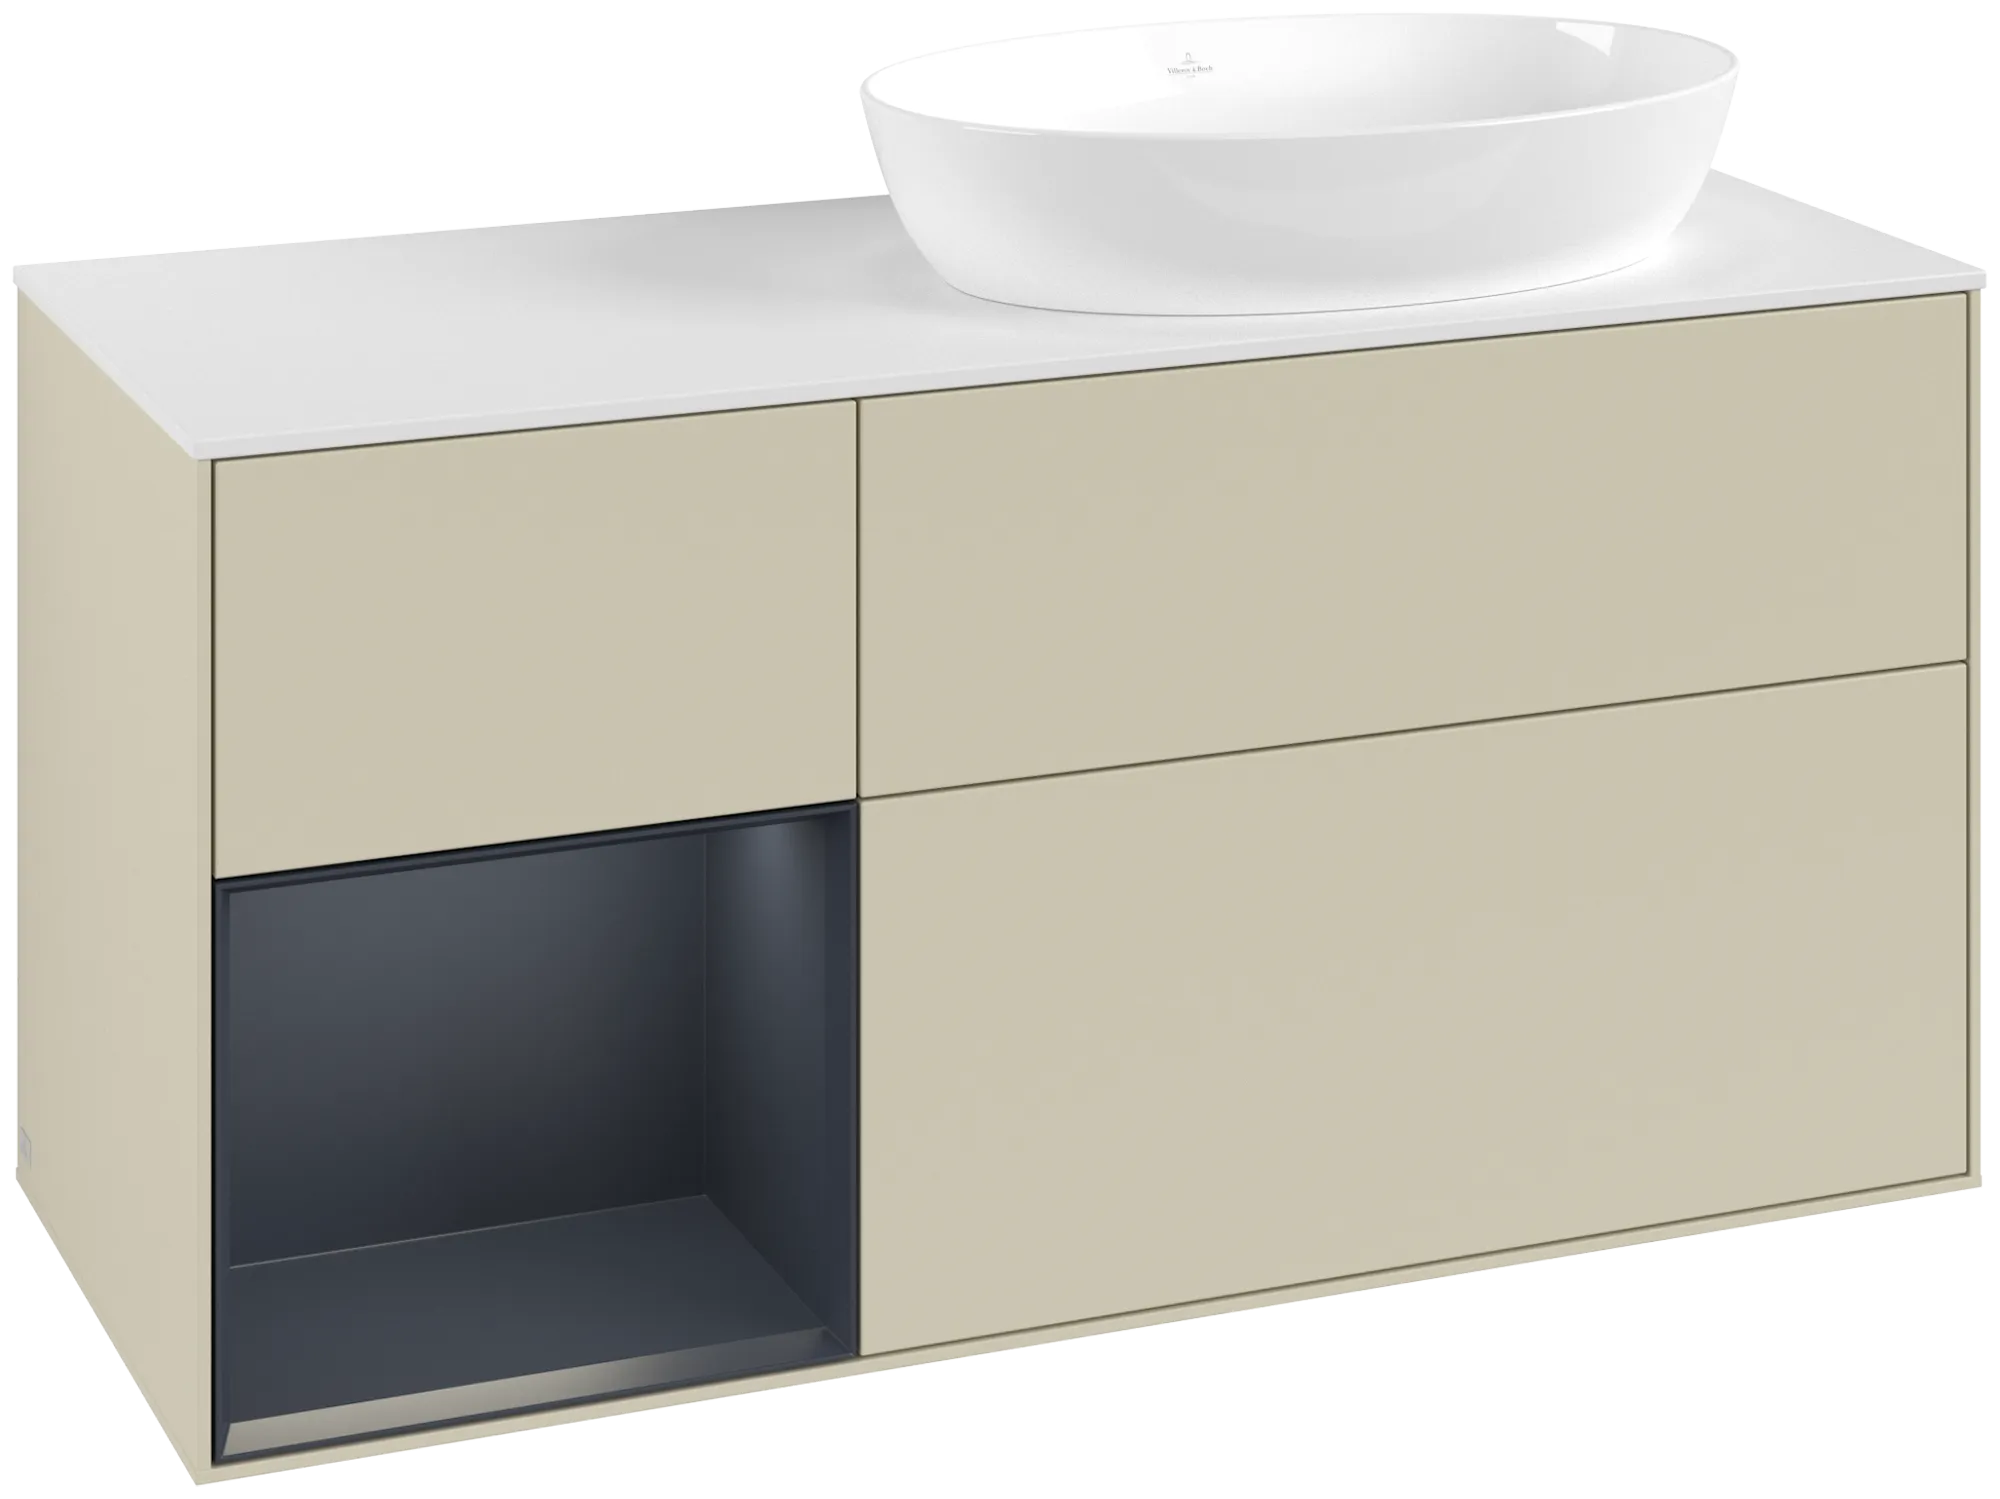 Picture of VILLEROY BOCH Finion Vanity unit, with lighting, 3 pull-out compartments, 1200 x 603 x 501 mm, Silk Grey Matt Lacquer / Midnight Blue Matt Lacquer / Glass White Matt #GA41HGHJ